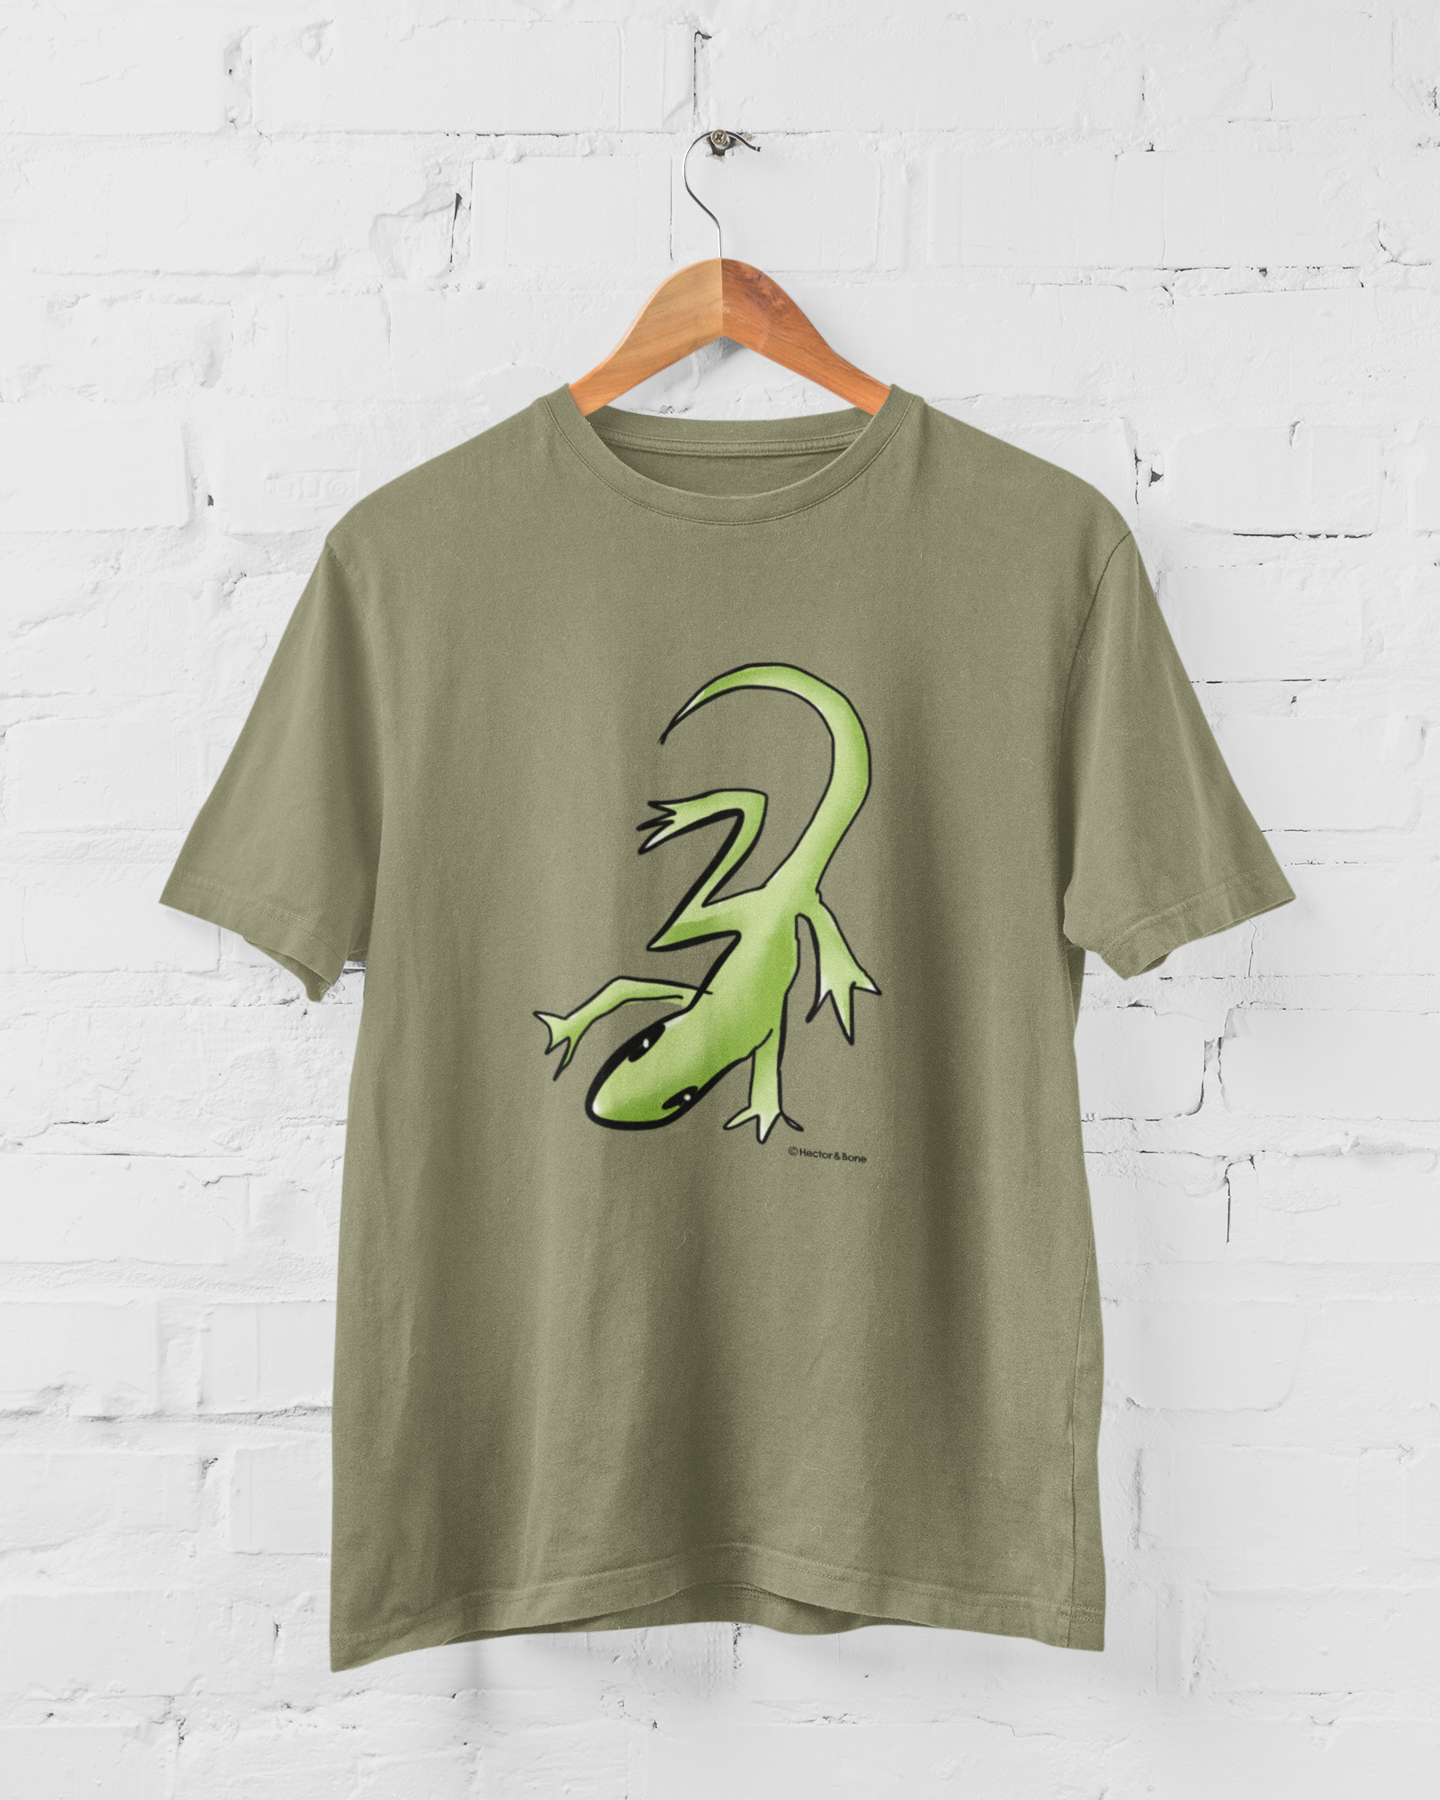 Lizard T-shirt - Illustrated Lounge Lizard T-shirt on vegan sage green colour cotton t-shirts by Hector and Bone